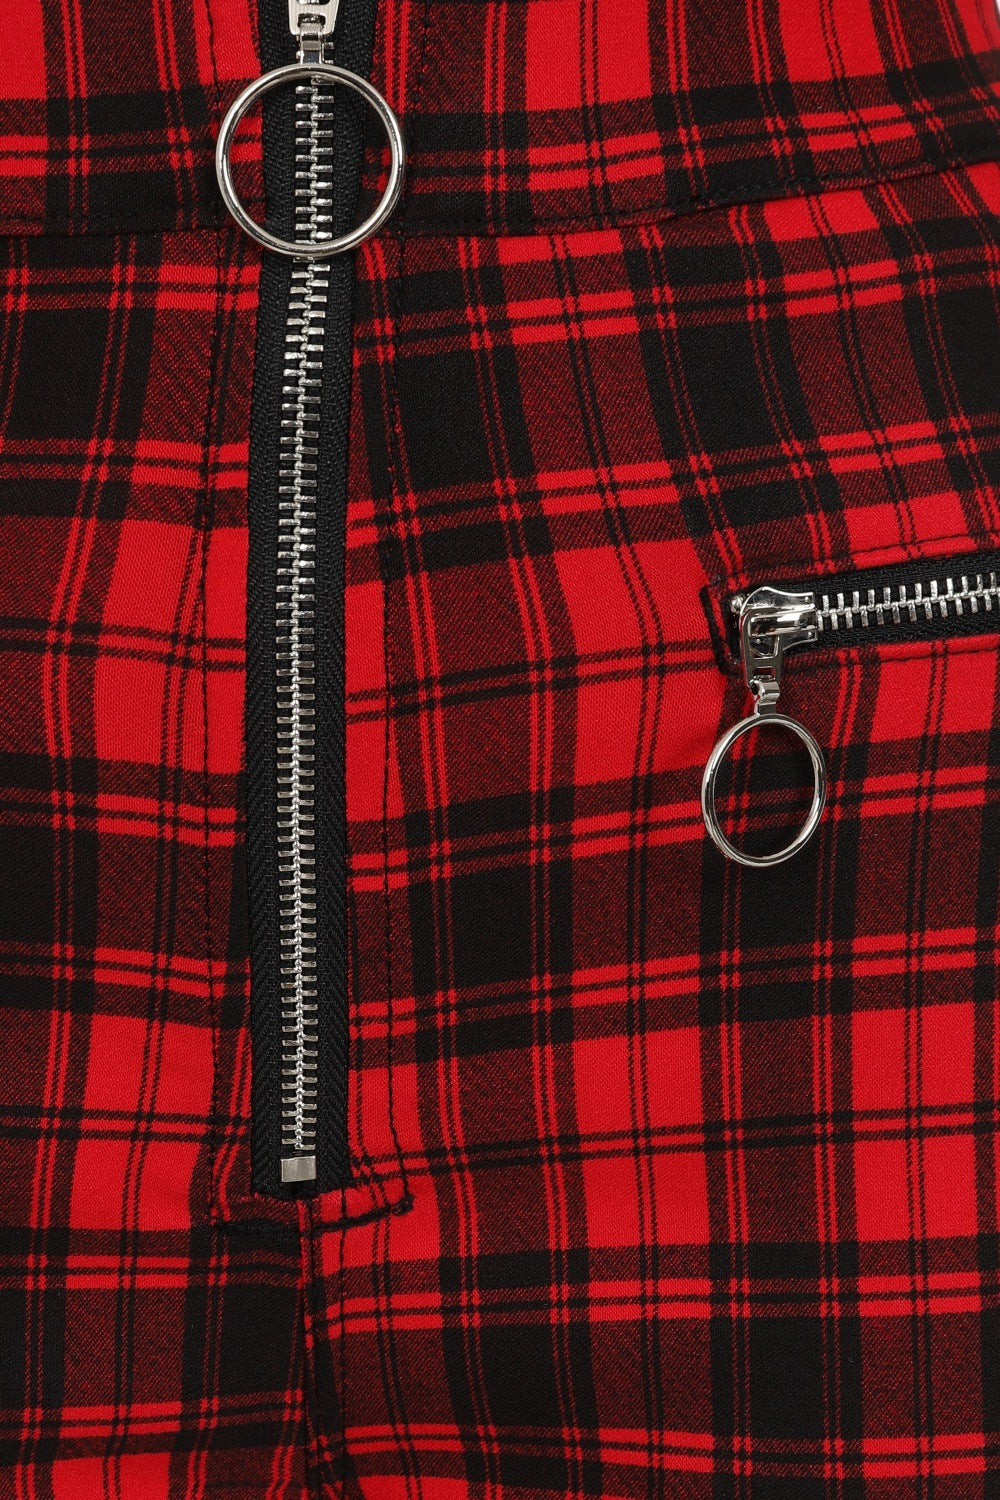 High waisted red check trousers with zip details on legs